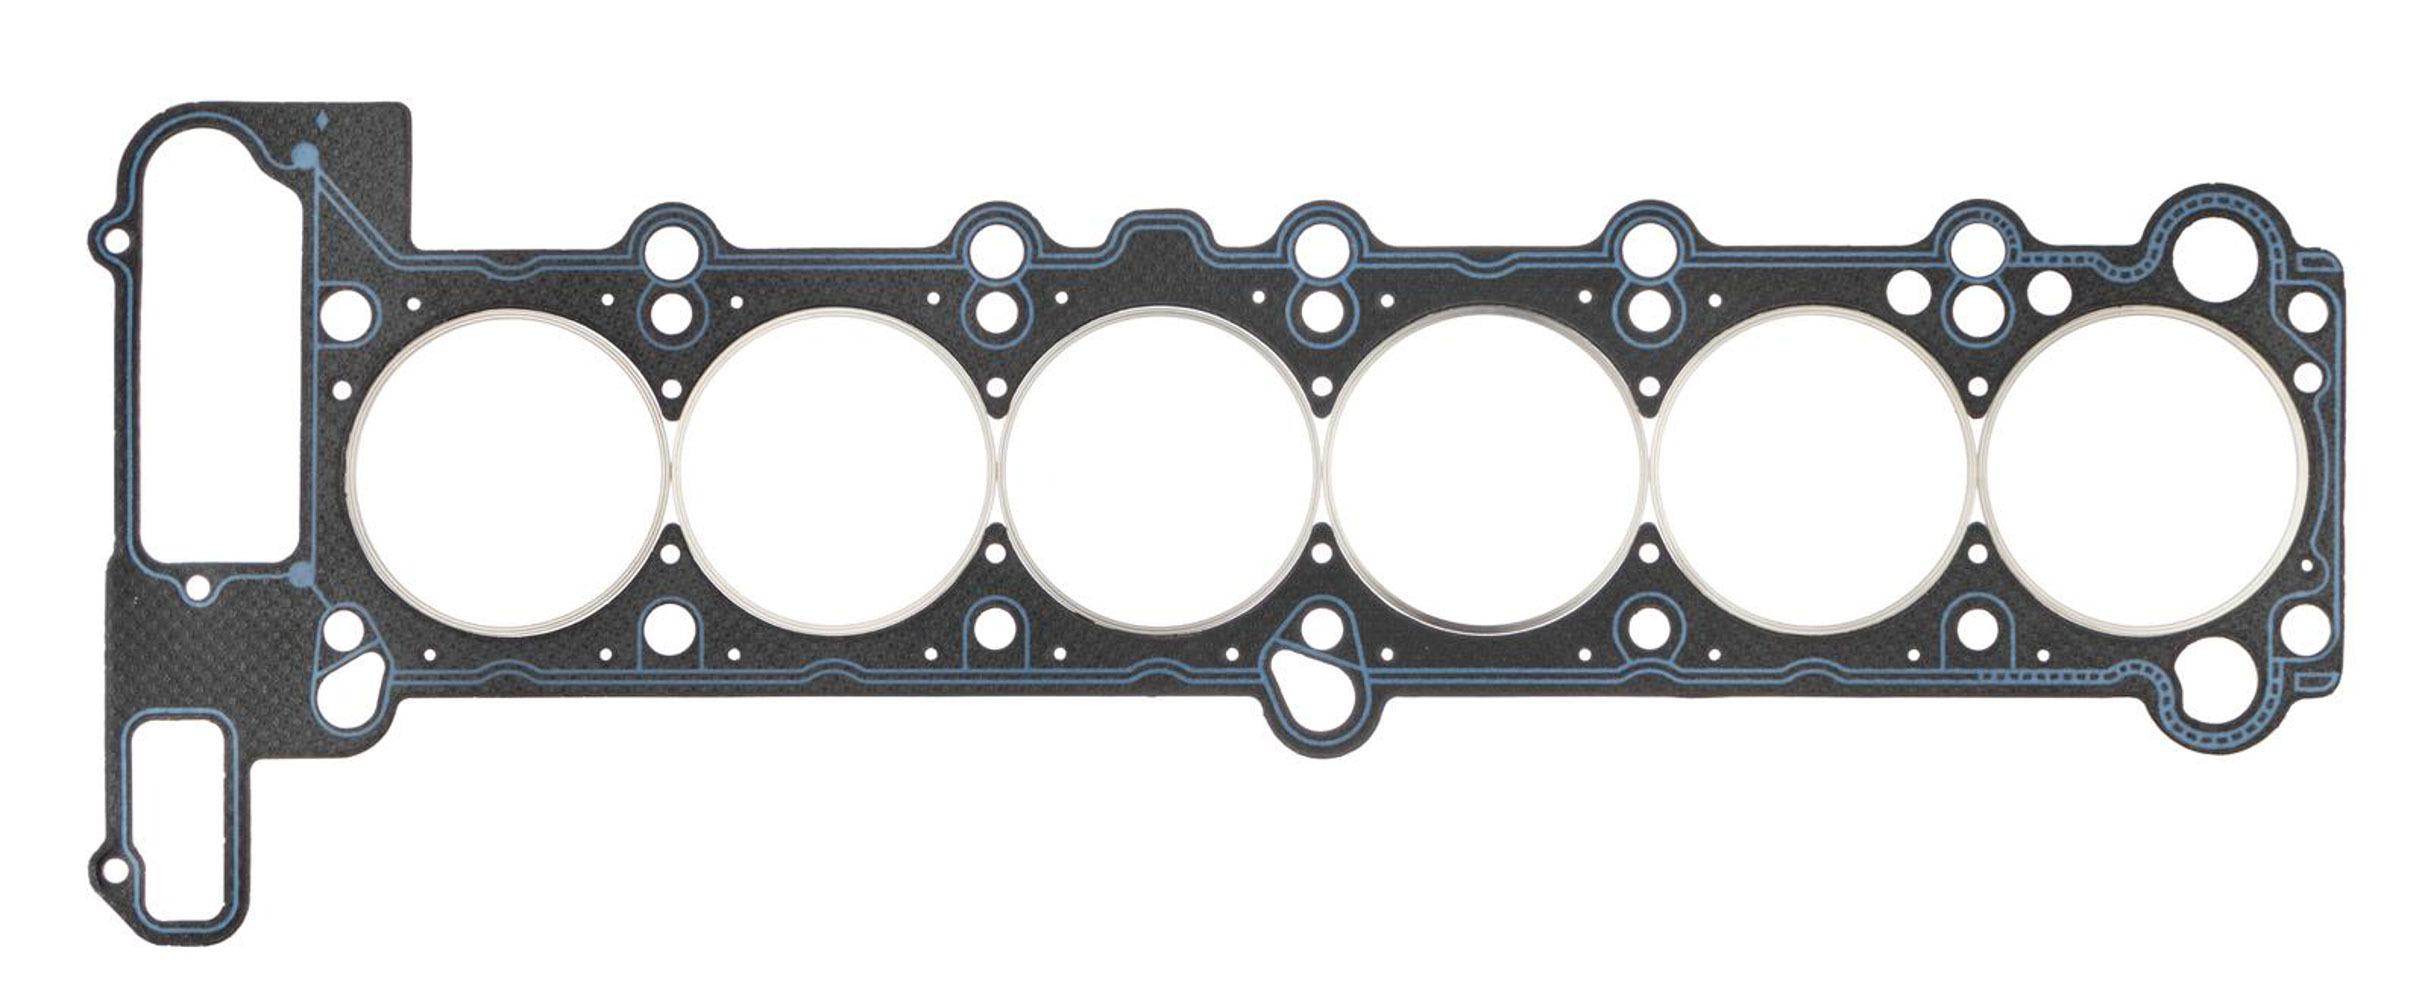 SCE Gaskets CR330012 - Cylinder Head Gasket, Vulcan Cut Ring, 84.50 mm Bore, 2.00 mm Compression Thickness, Steel Core Laminate, BMW Inline-6, Each